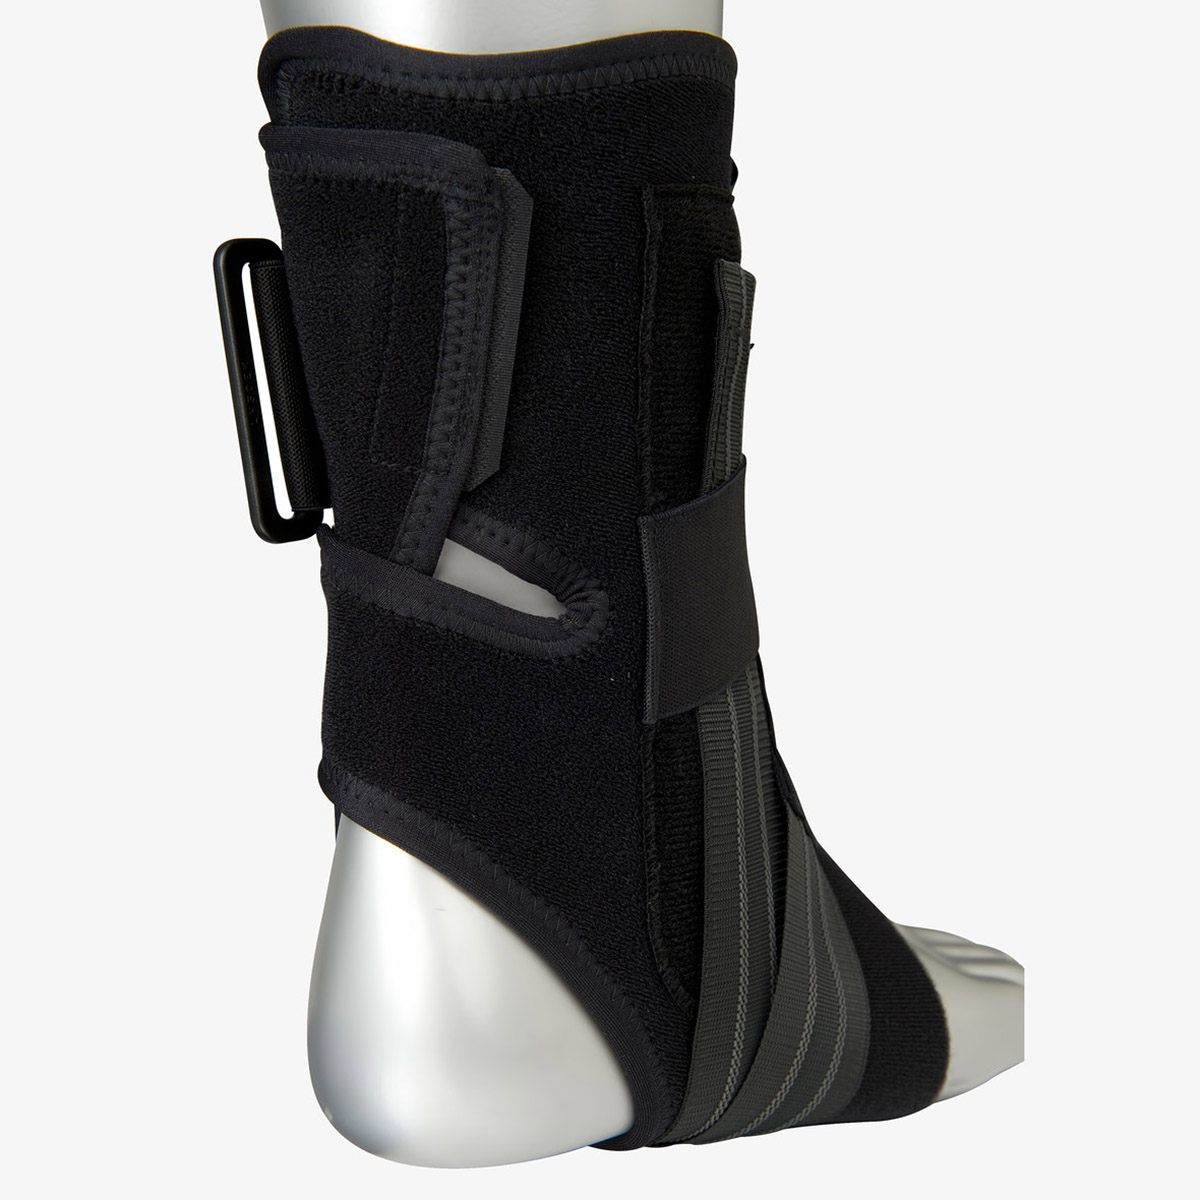 Zamst A1 Ankle Brace, , large image number null